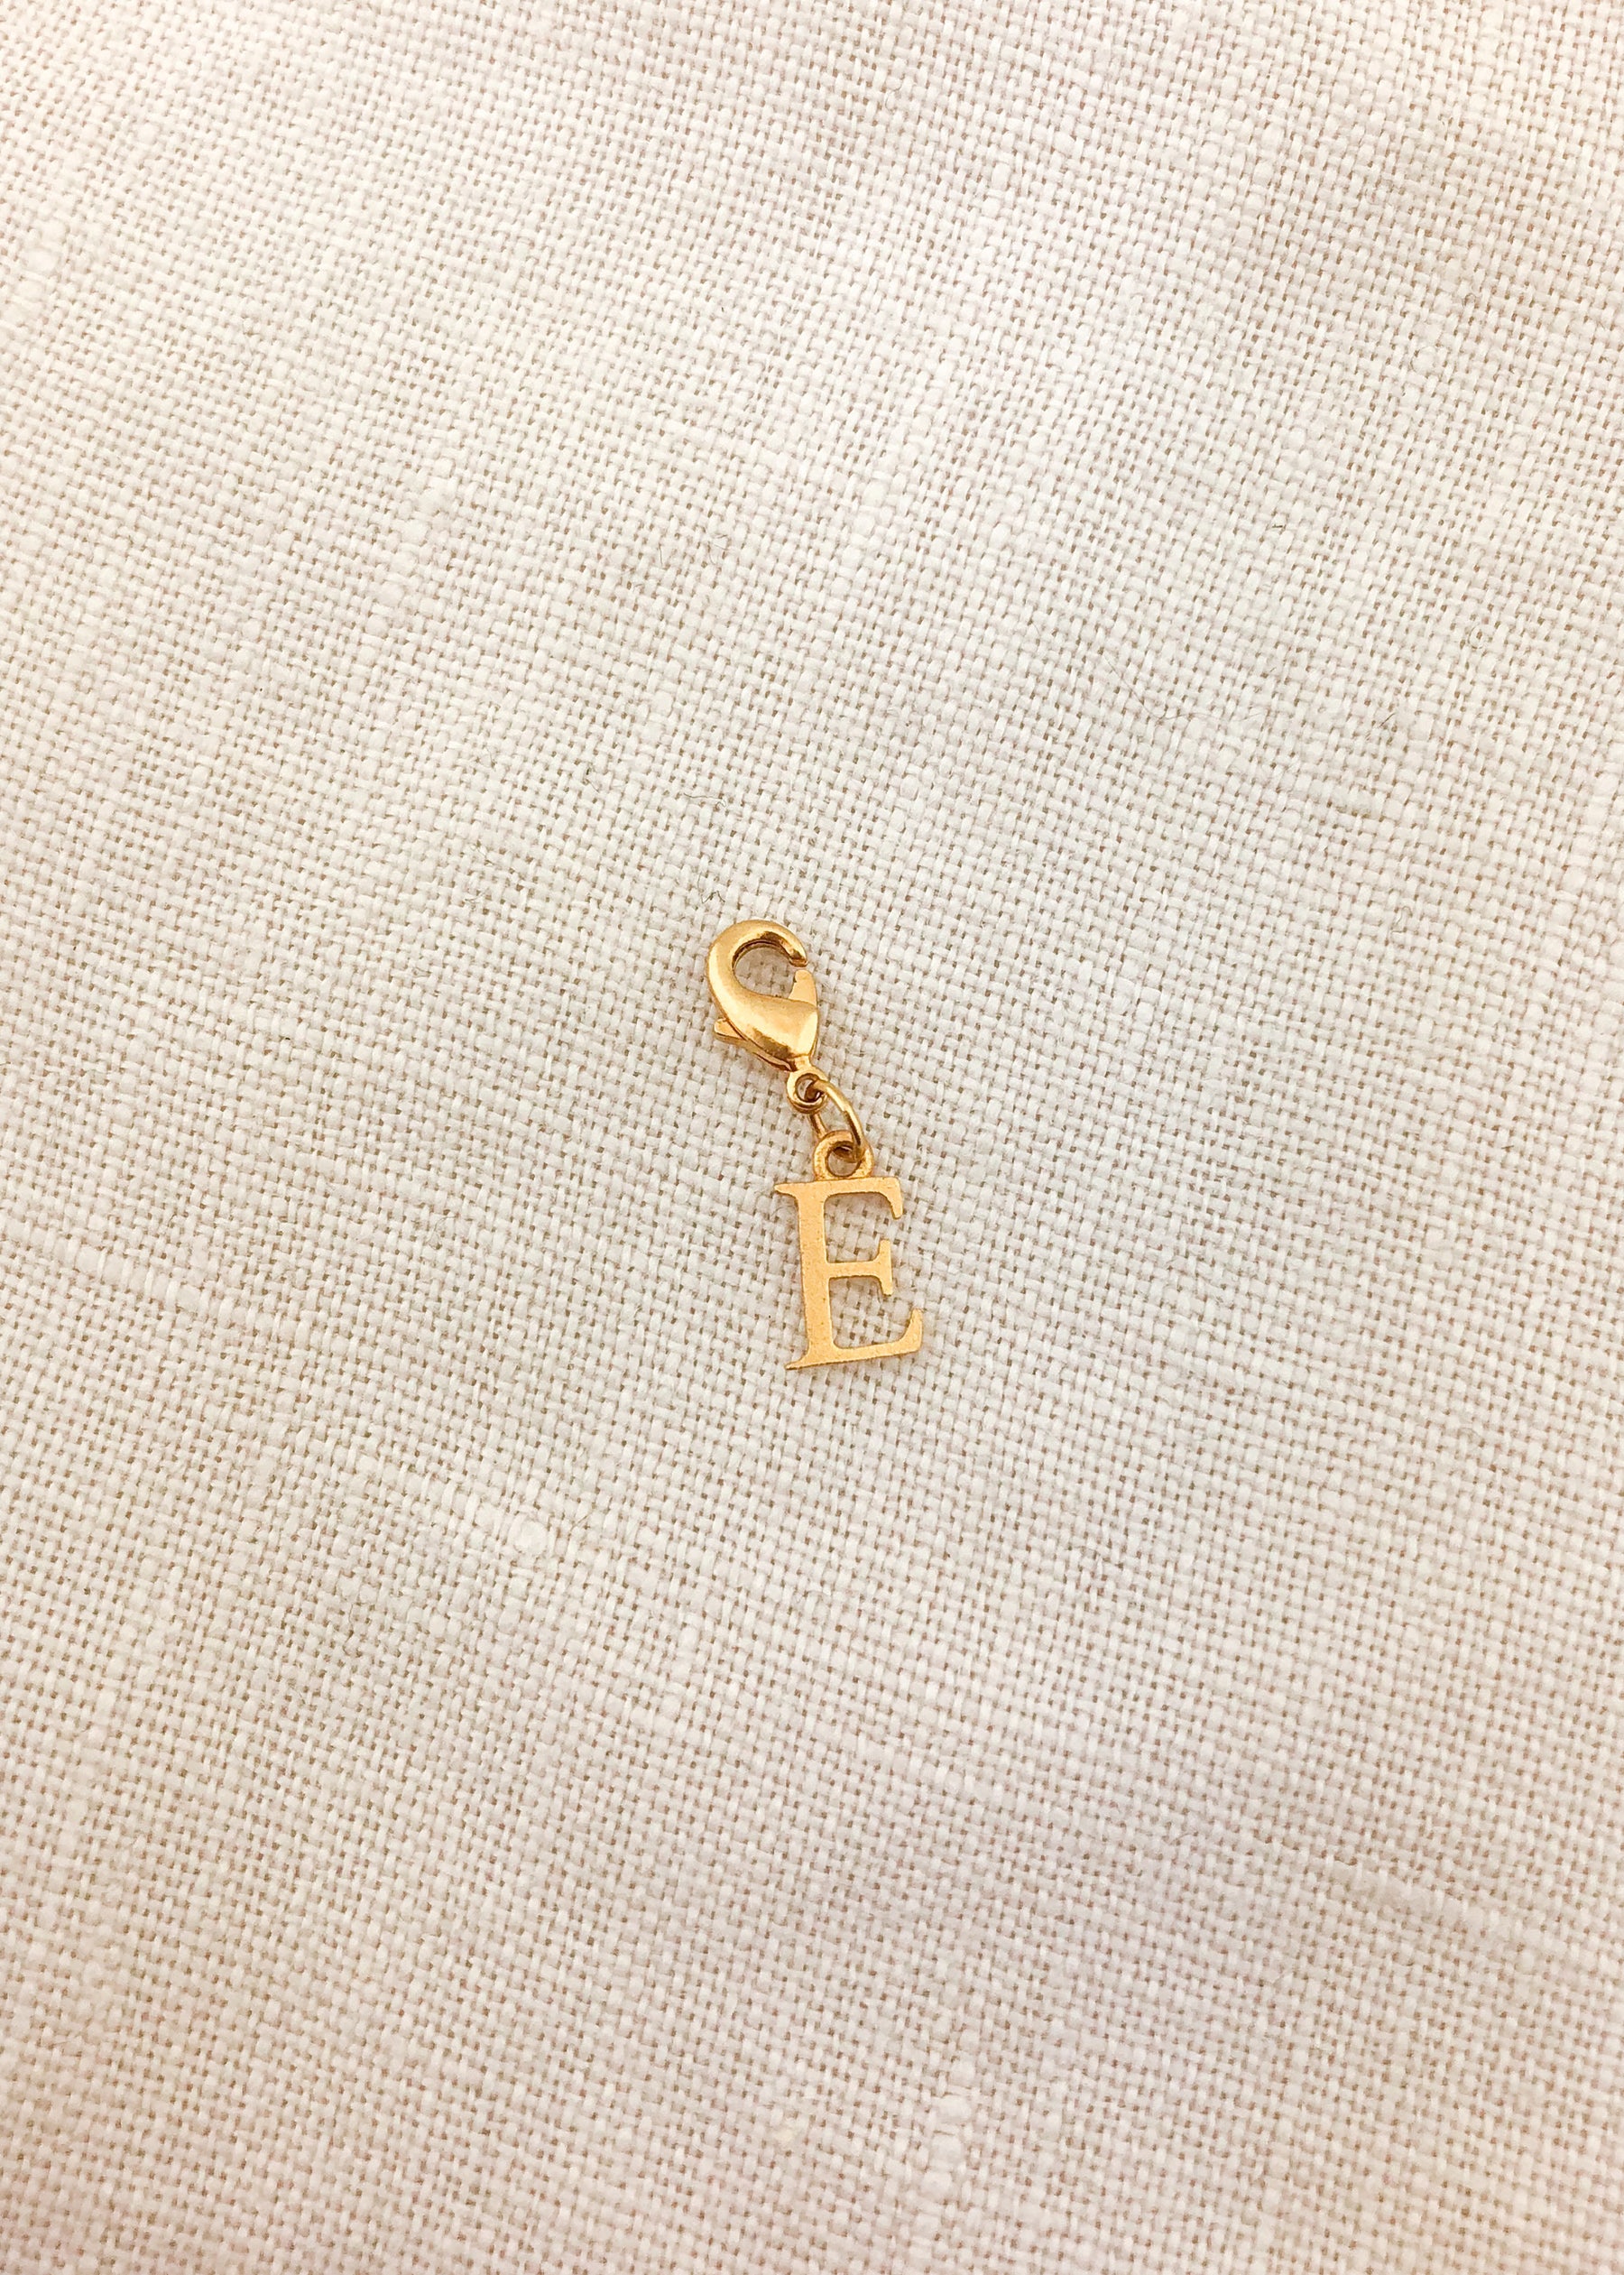 Letter Charms A-Z